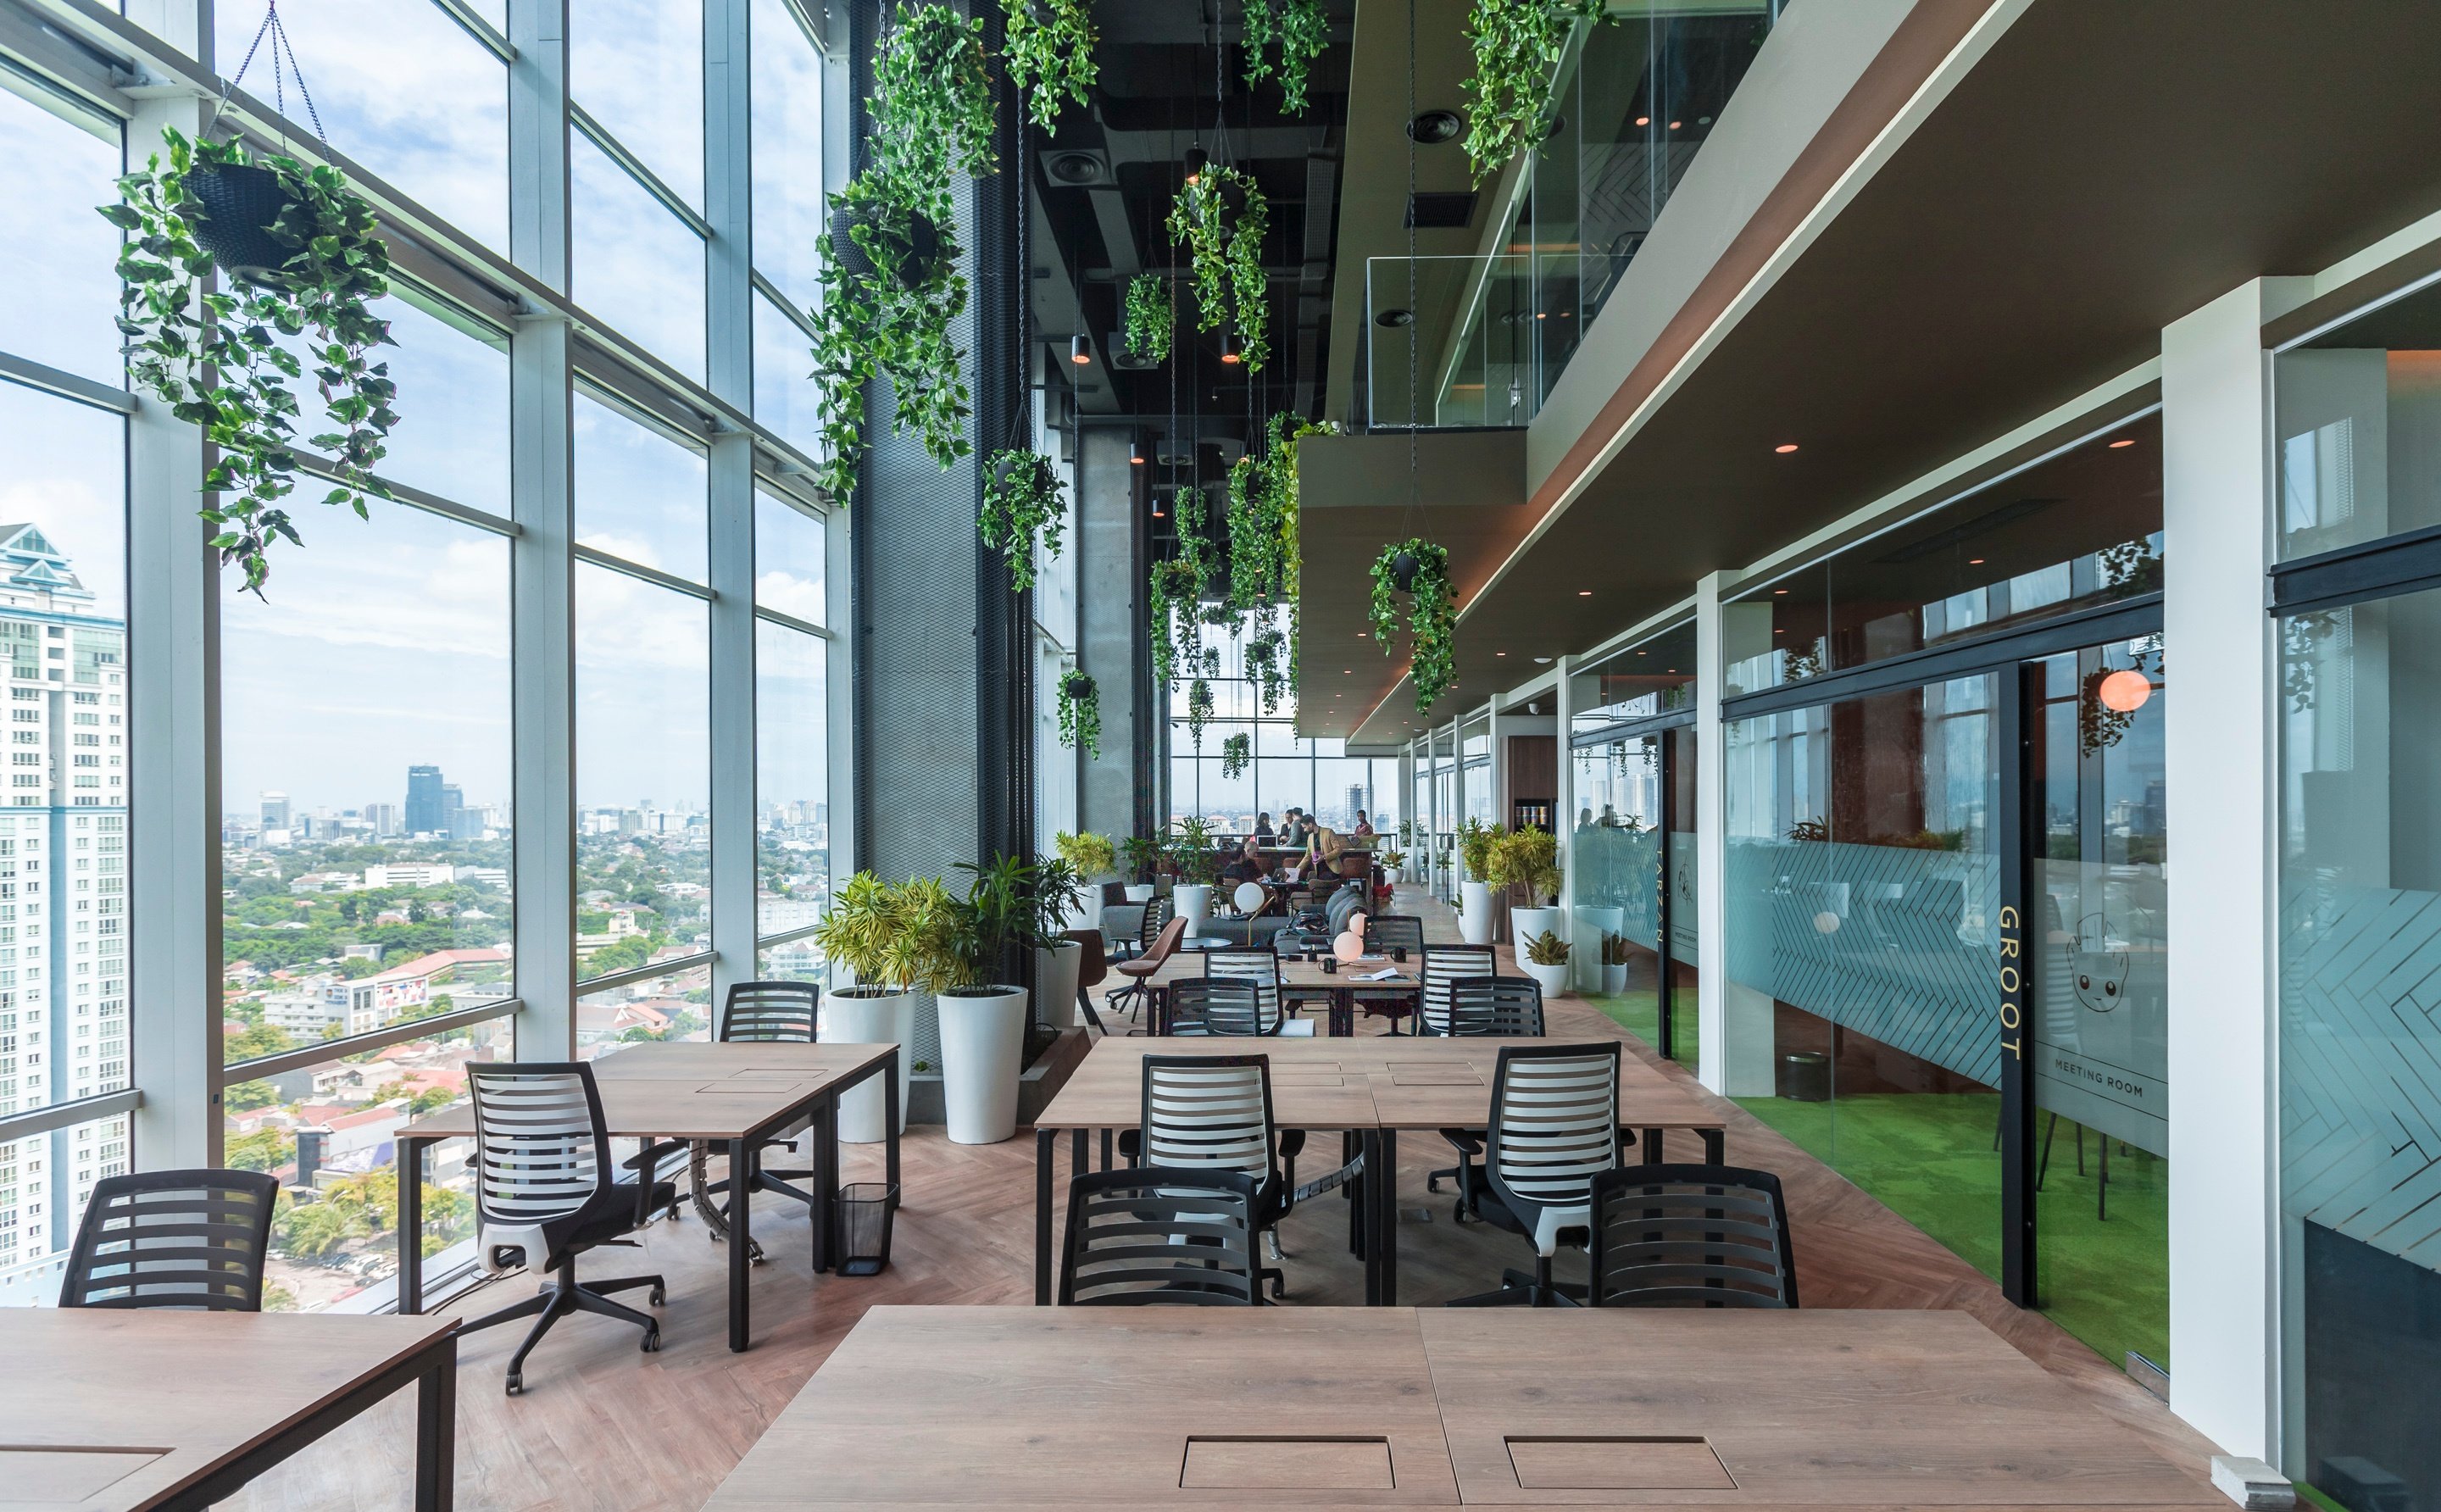 Workplace Wellness and Active Lifestyle in Coworking Spaces